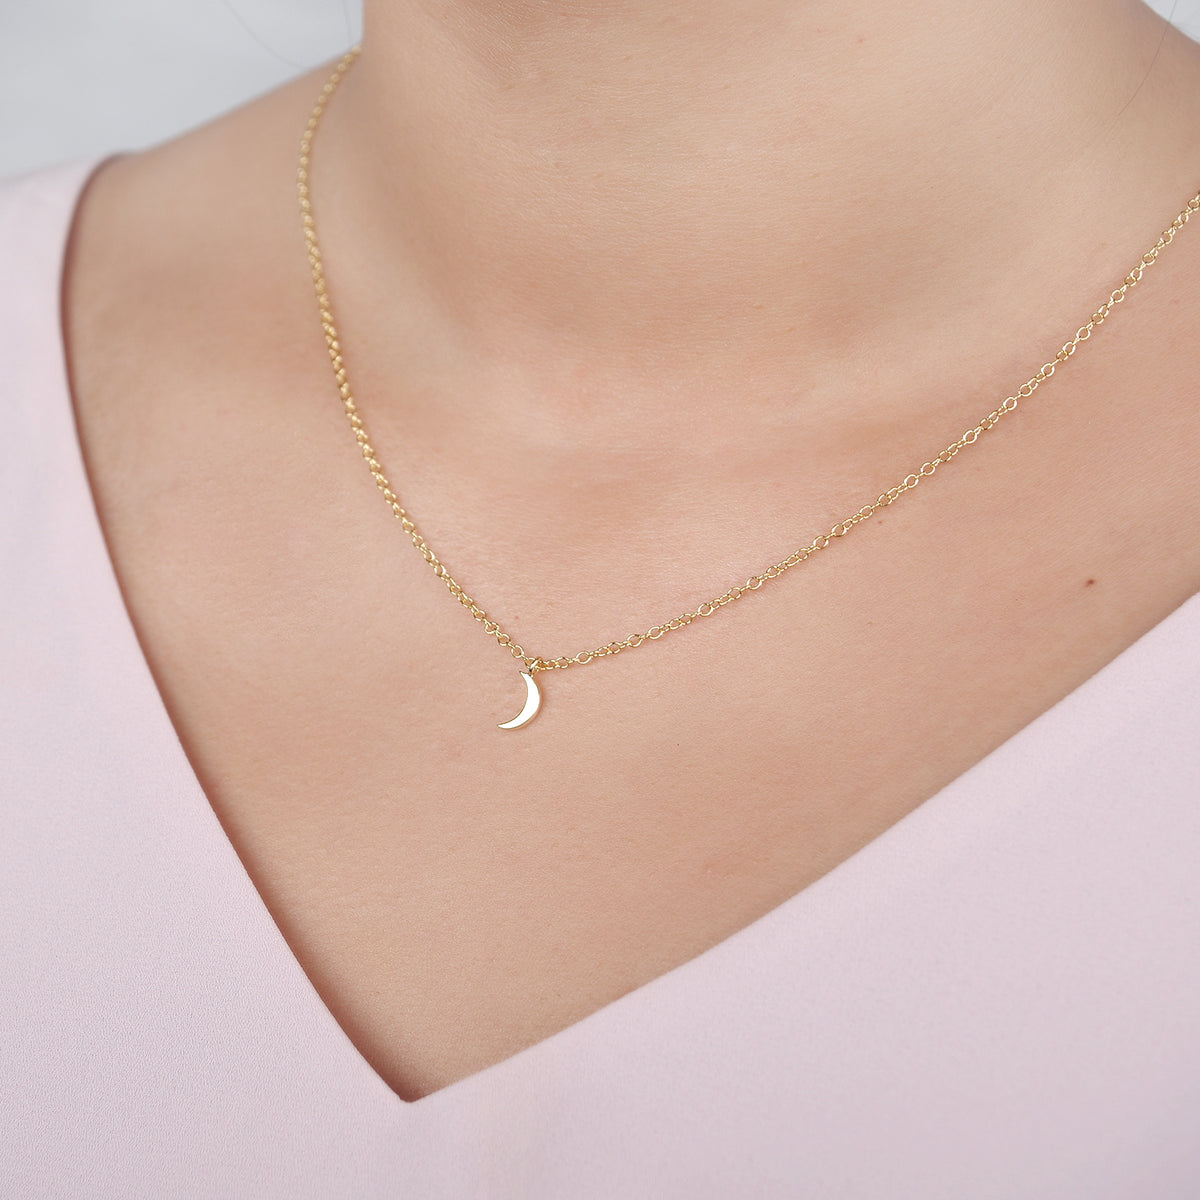 Sisters Crescent Moon Pendant Necklace